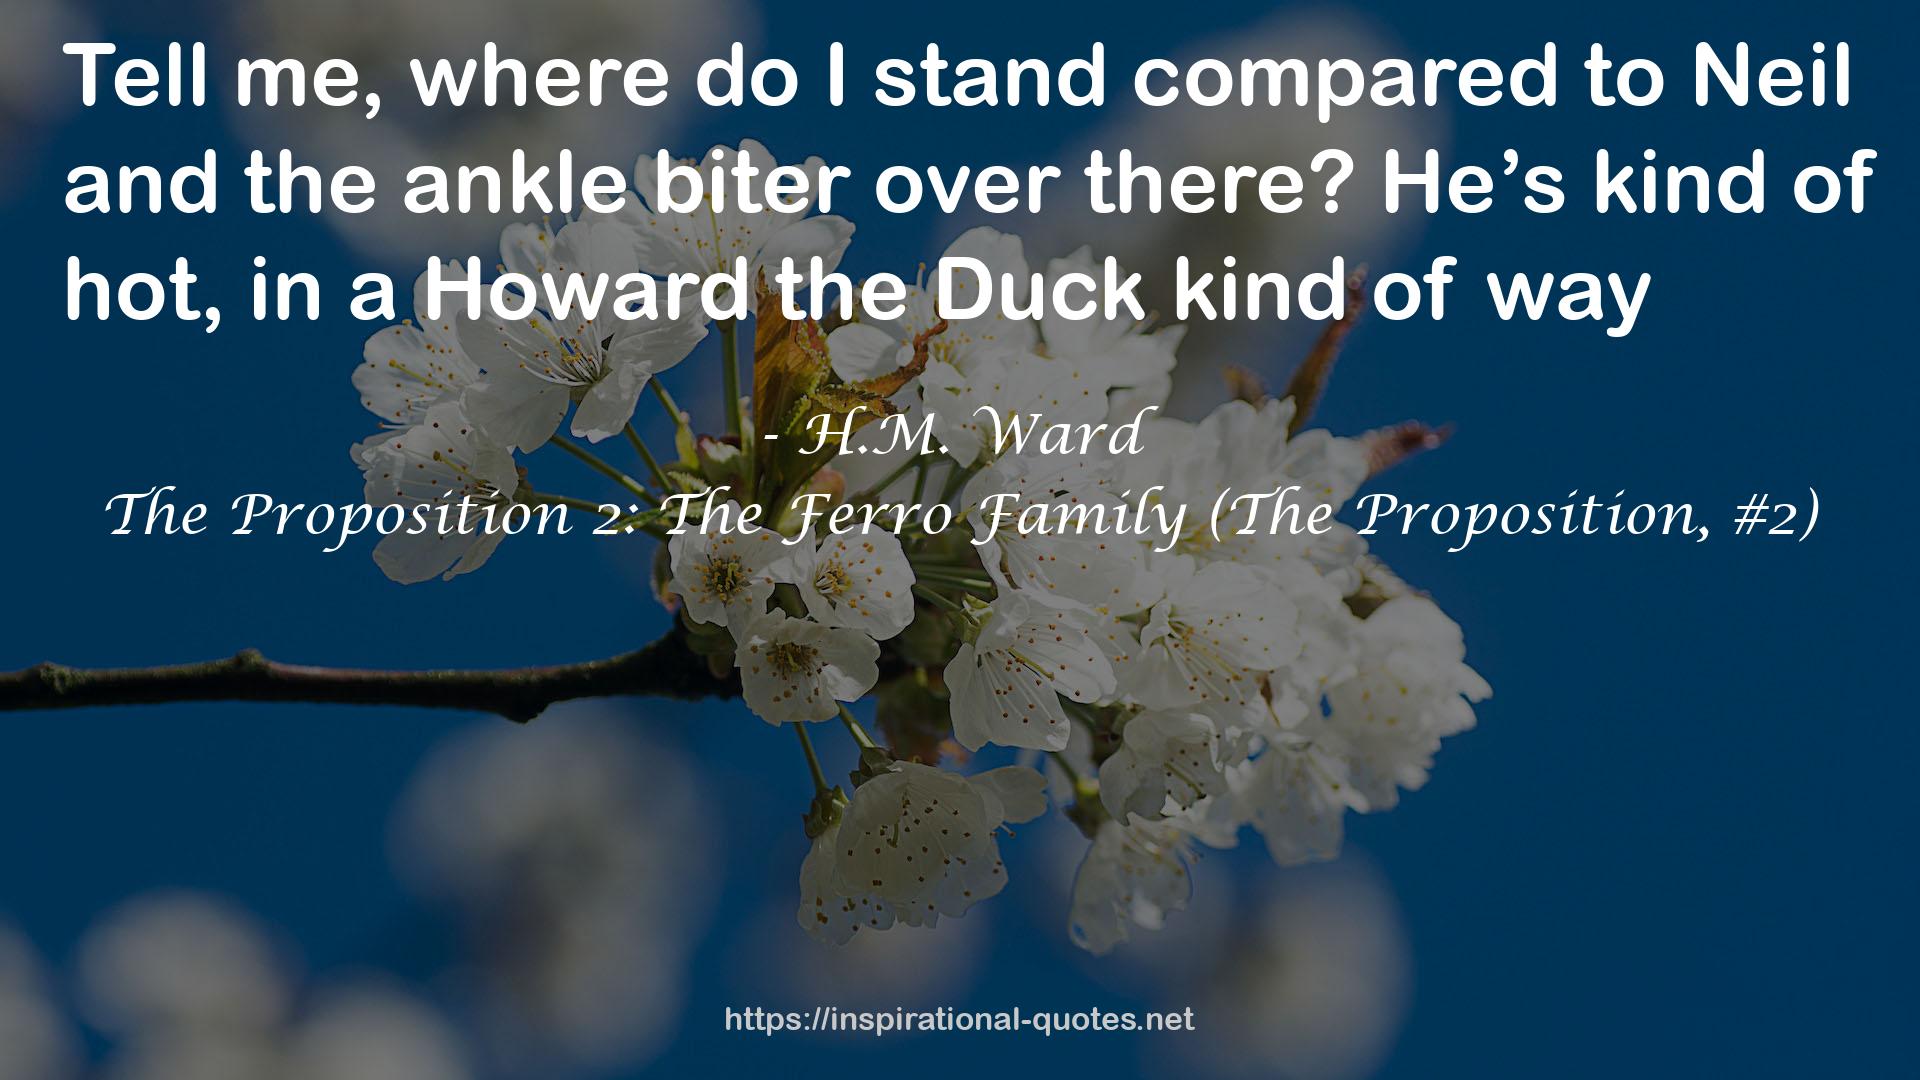 The Proposition 2: The Ferro Family (The Proposition, #2) QUOTES